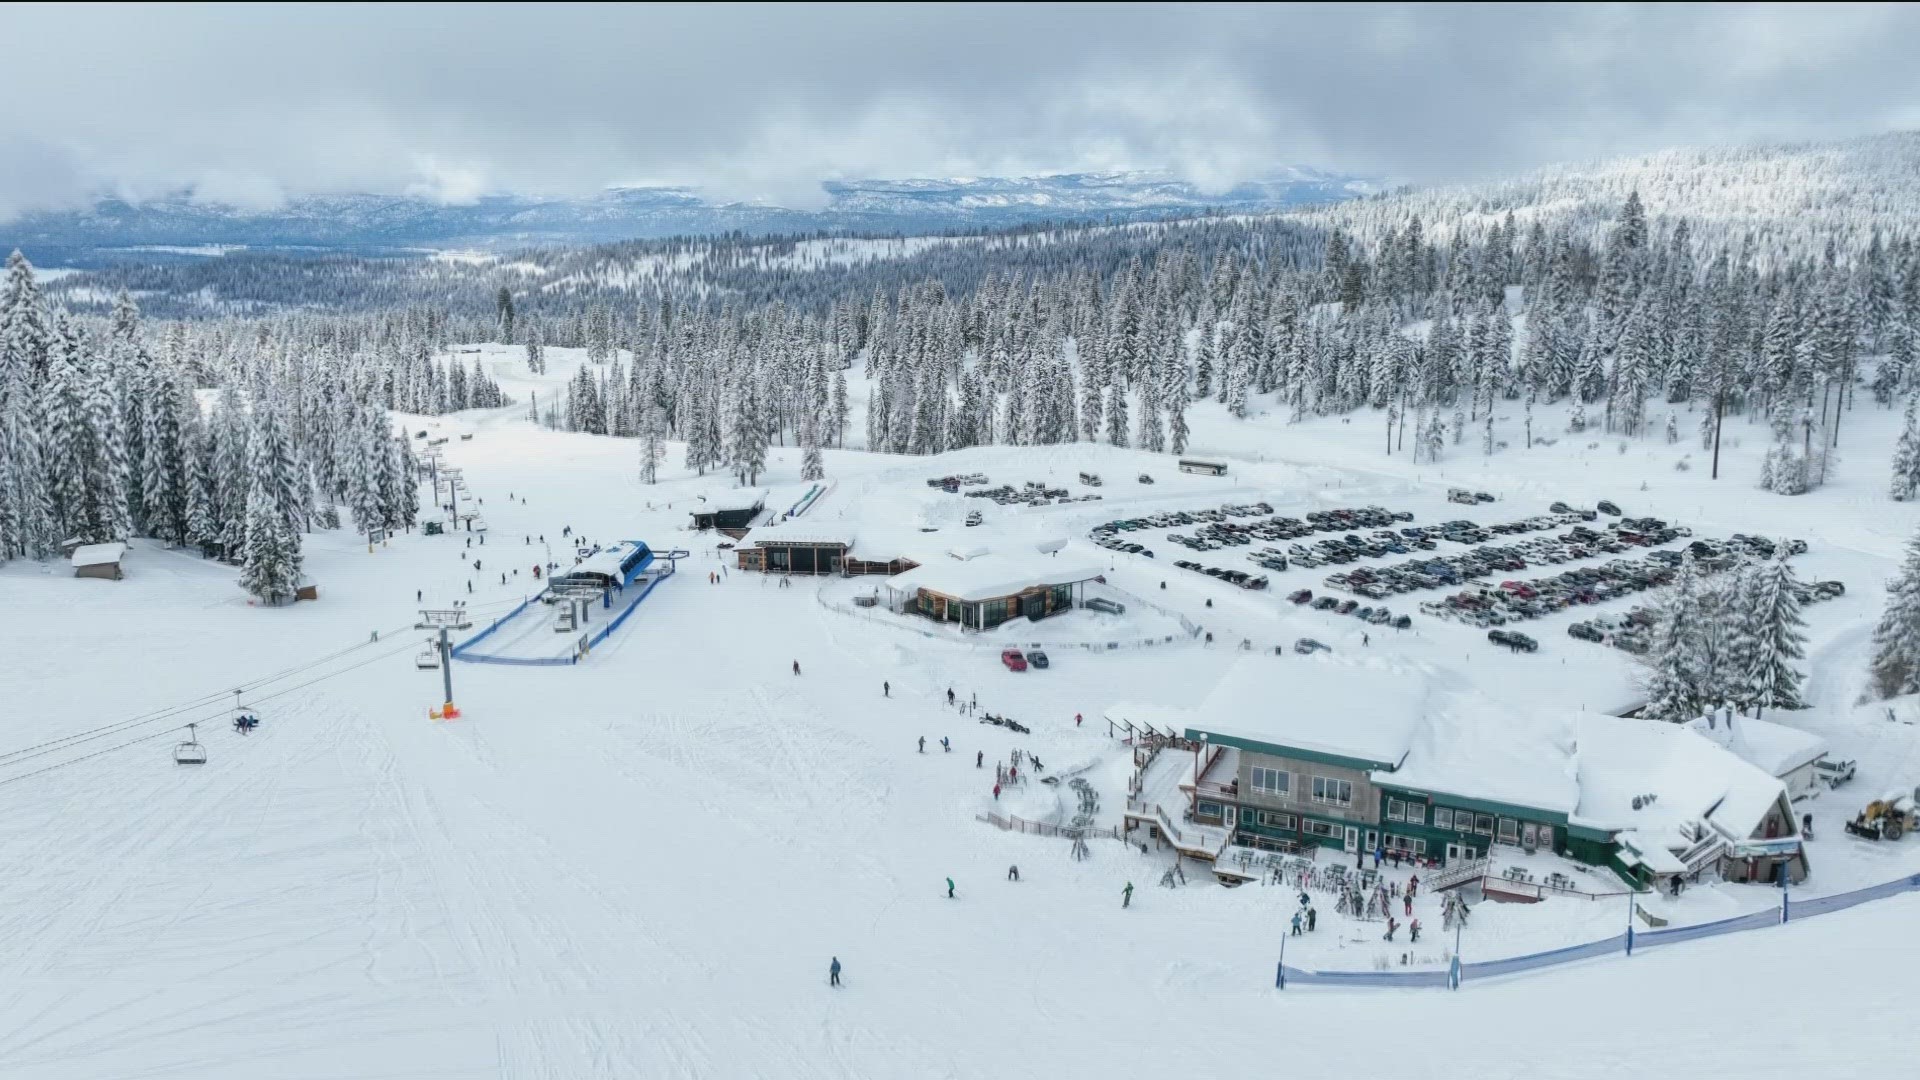 Just as winter was winding down, snowfall in the first week of March made a mountain out of a bunny hill, dumping feet of fresh snow on Idaho's ski resorts.